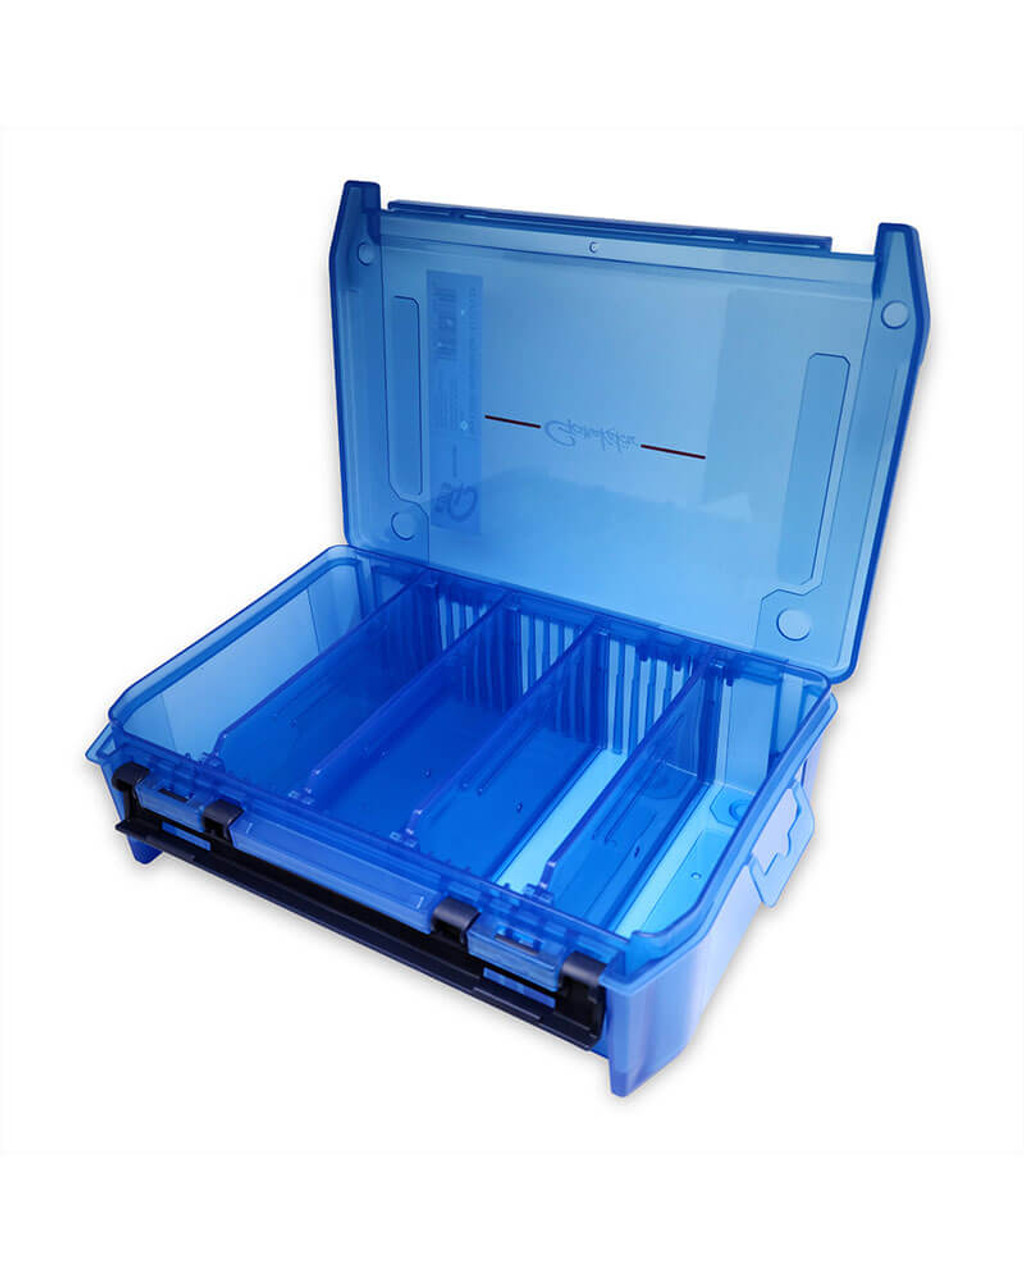 Gamakatsu G-Box Utility Case Slit Foam Cases, and Duo Side Case